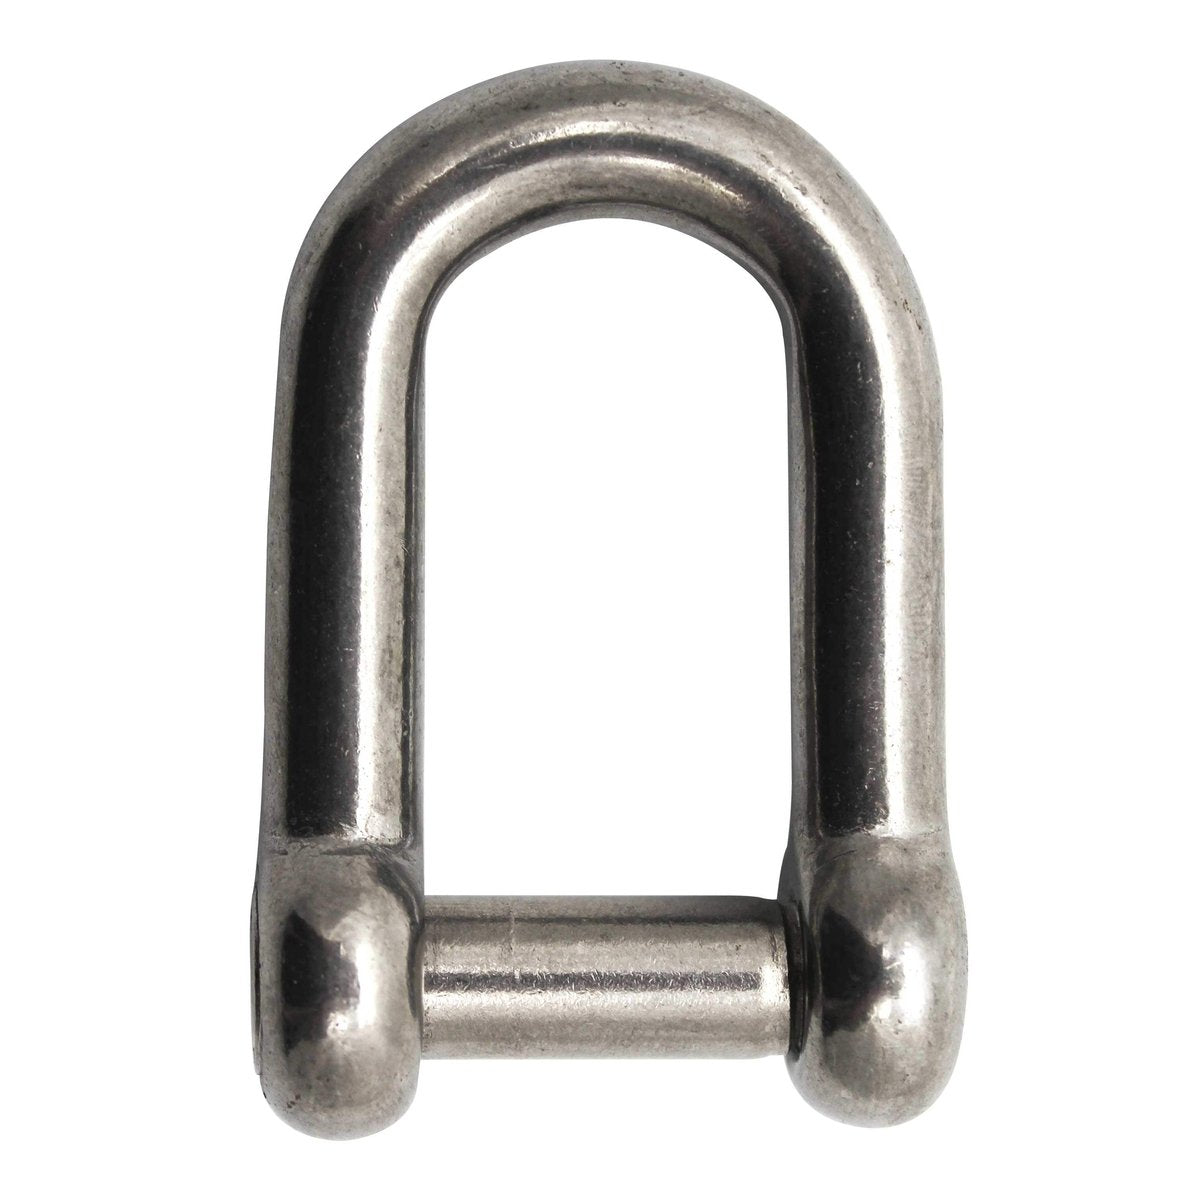 Extreme Max BoatTector SS D Shackle with No-Snag Pin 5/16" #3006.8396